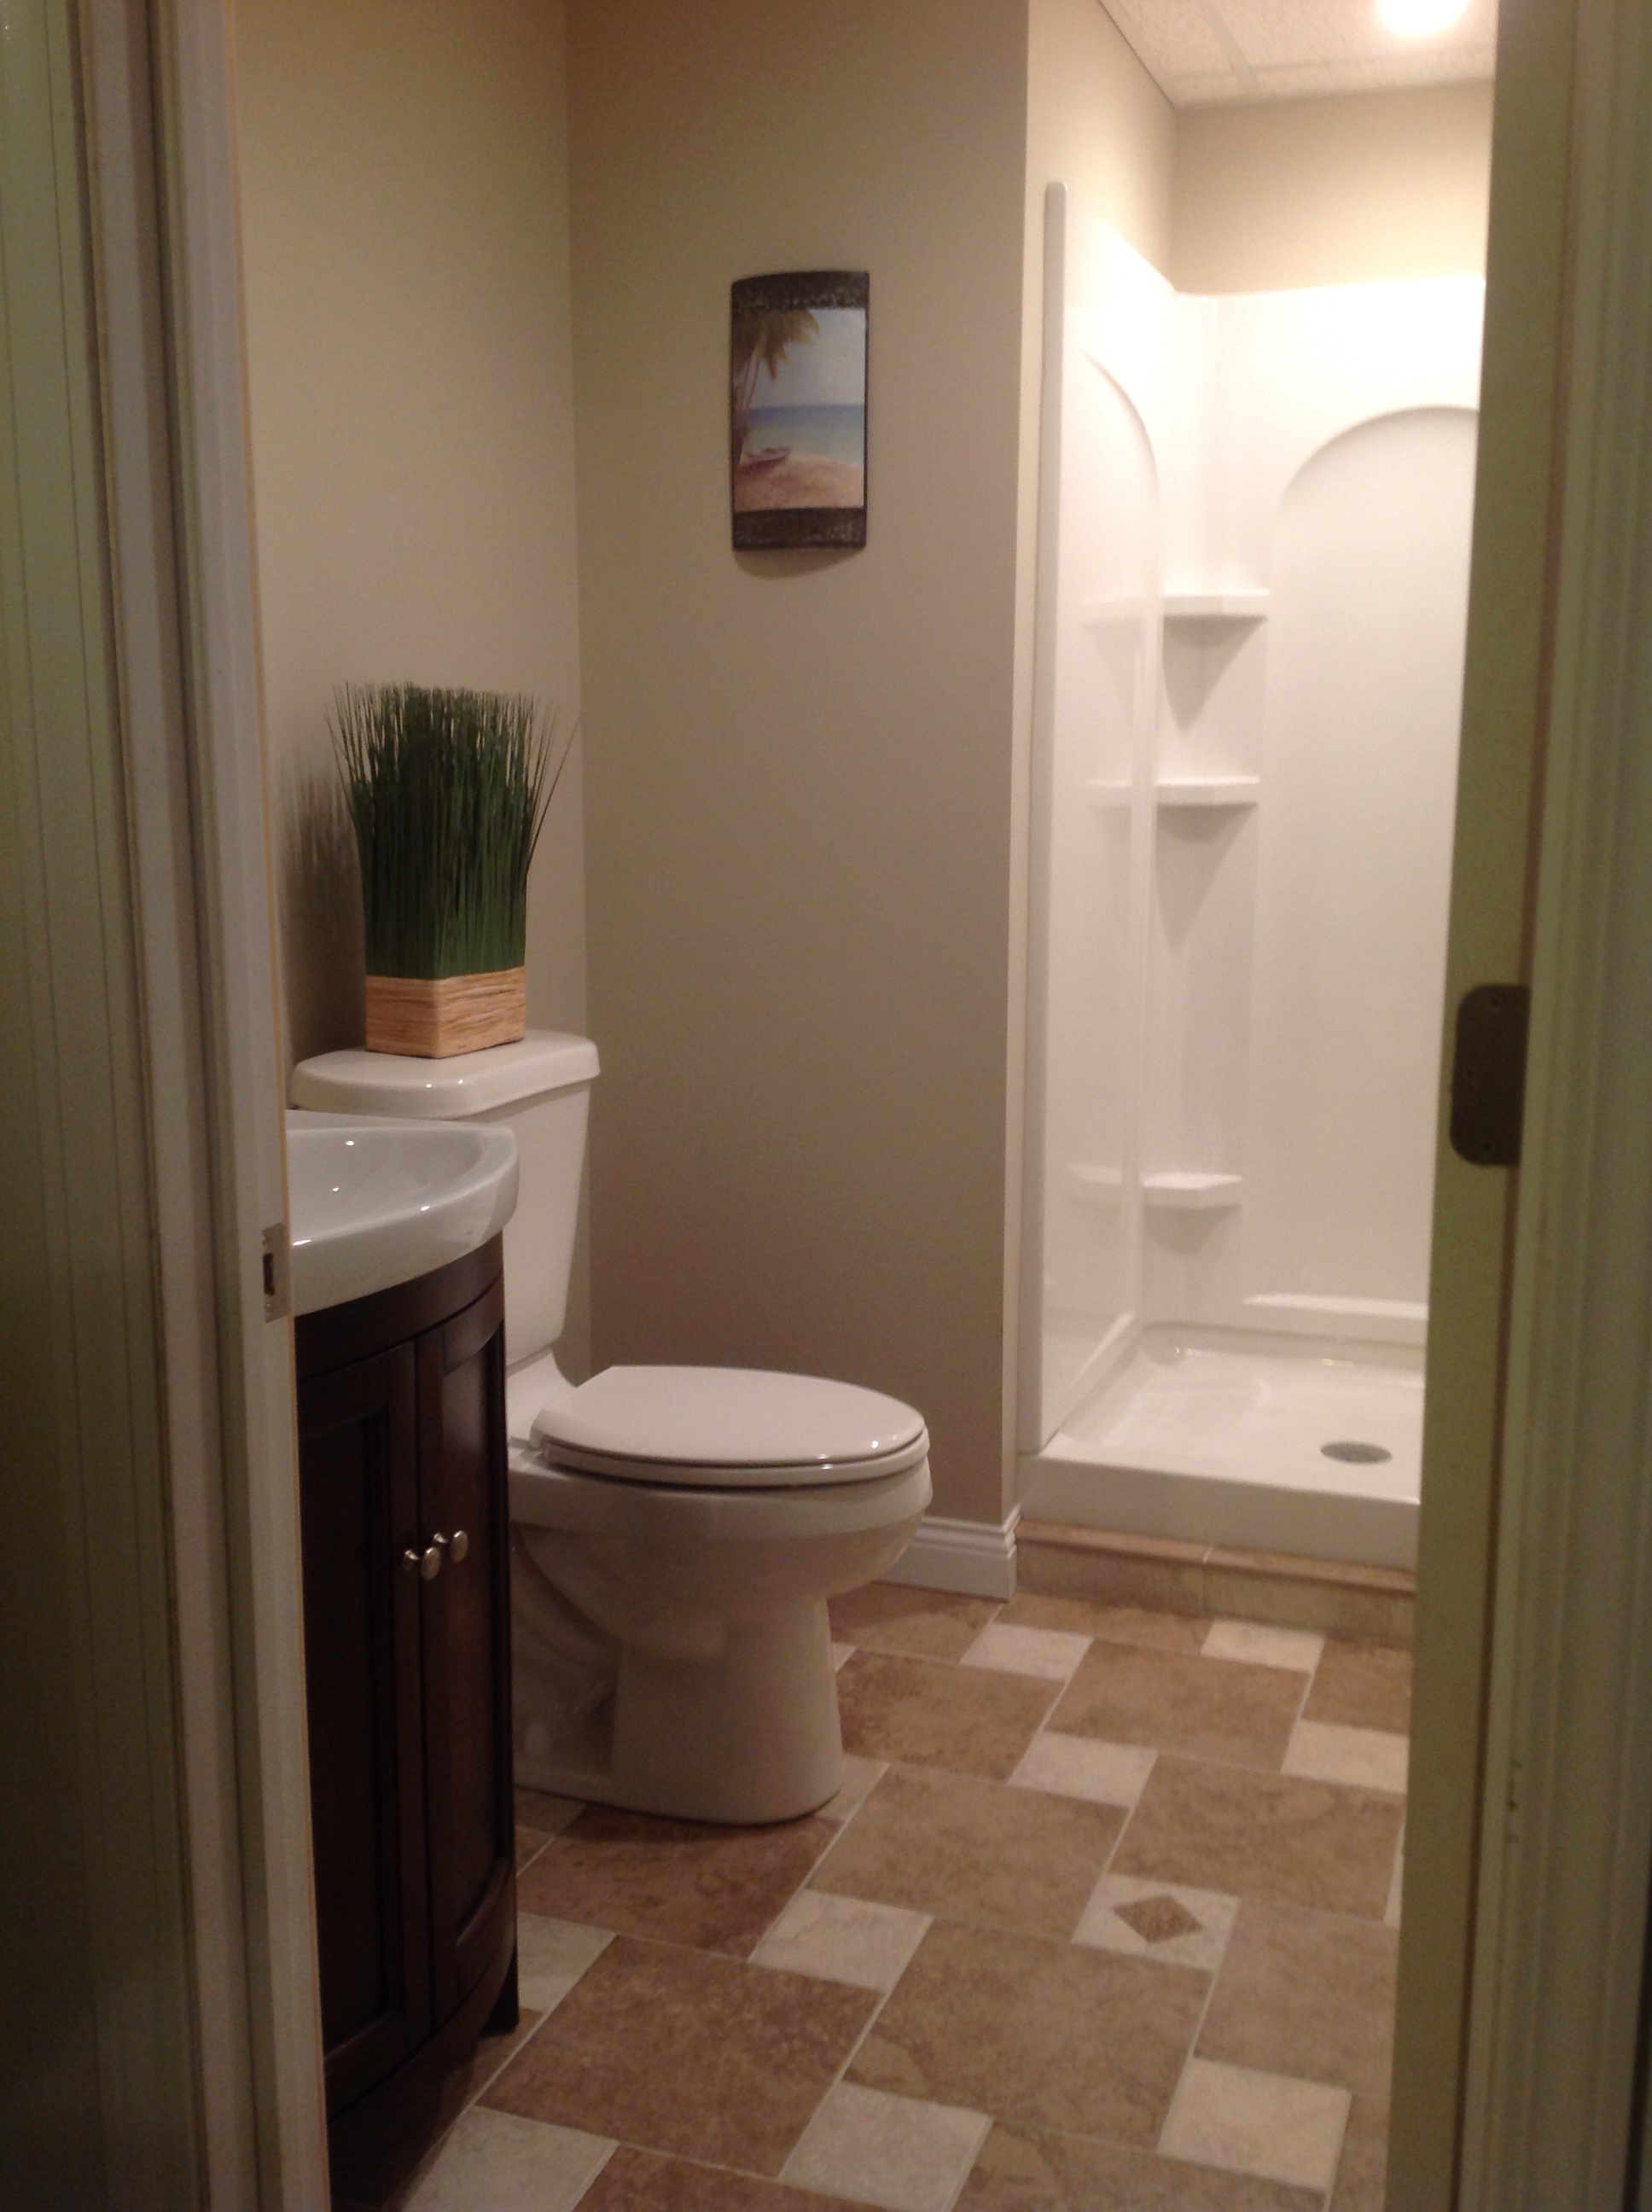 Bathroom Remodeling South Bend Indiana